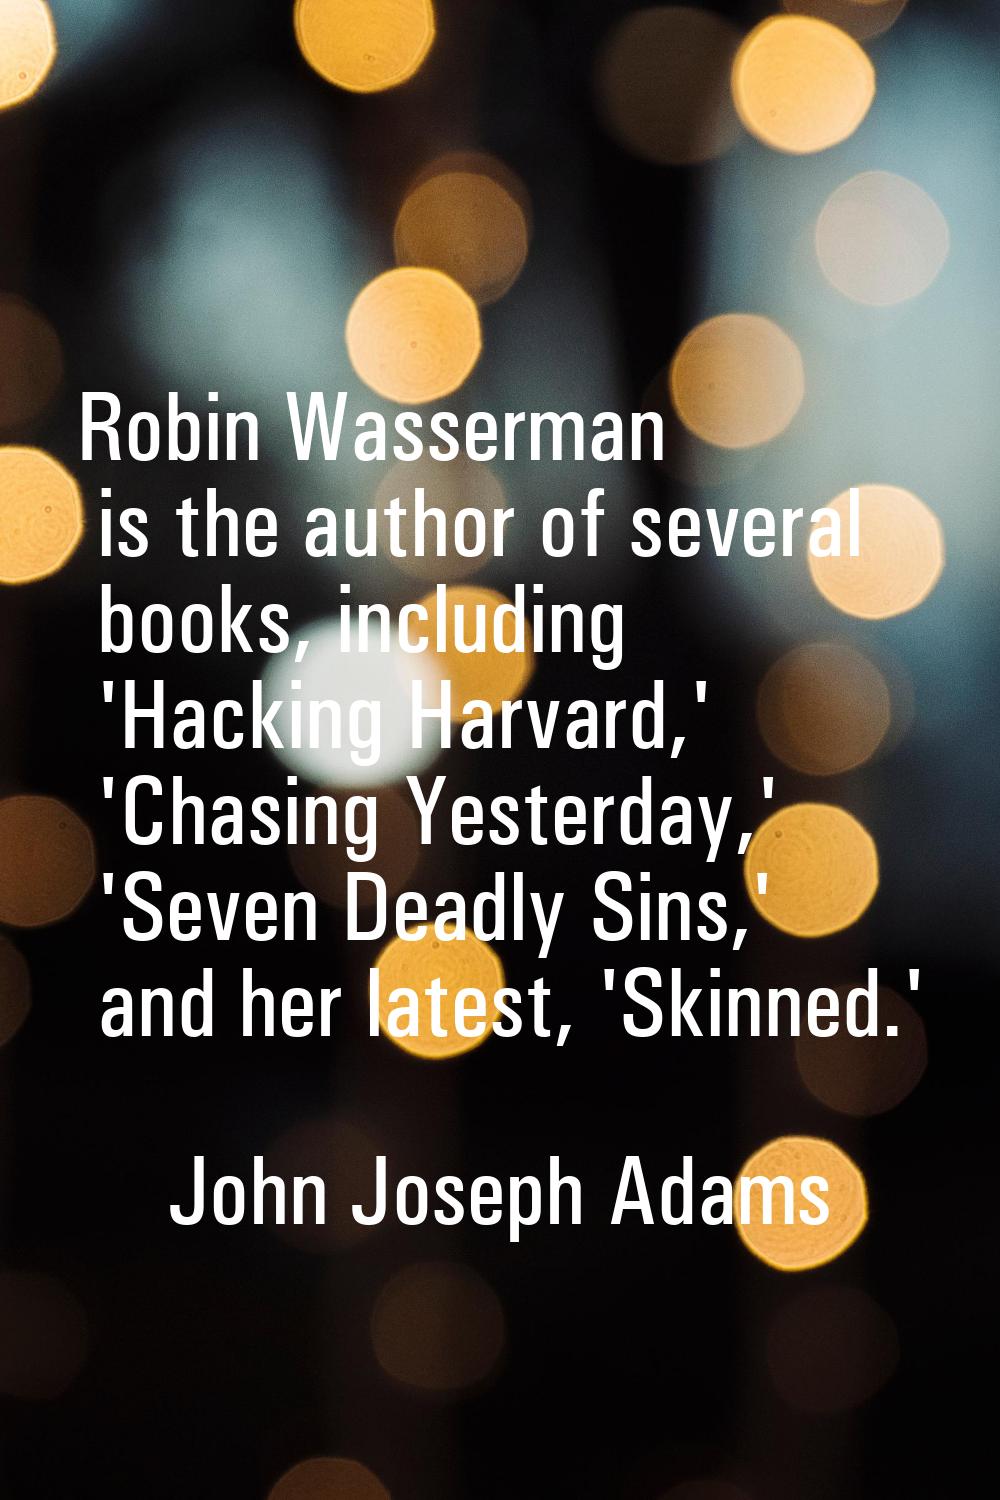 Robin Wasserman is the author of several books, including 'Hacking Harvard,' 'Chasing Yesterday,' '